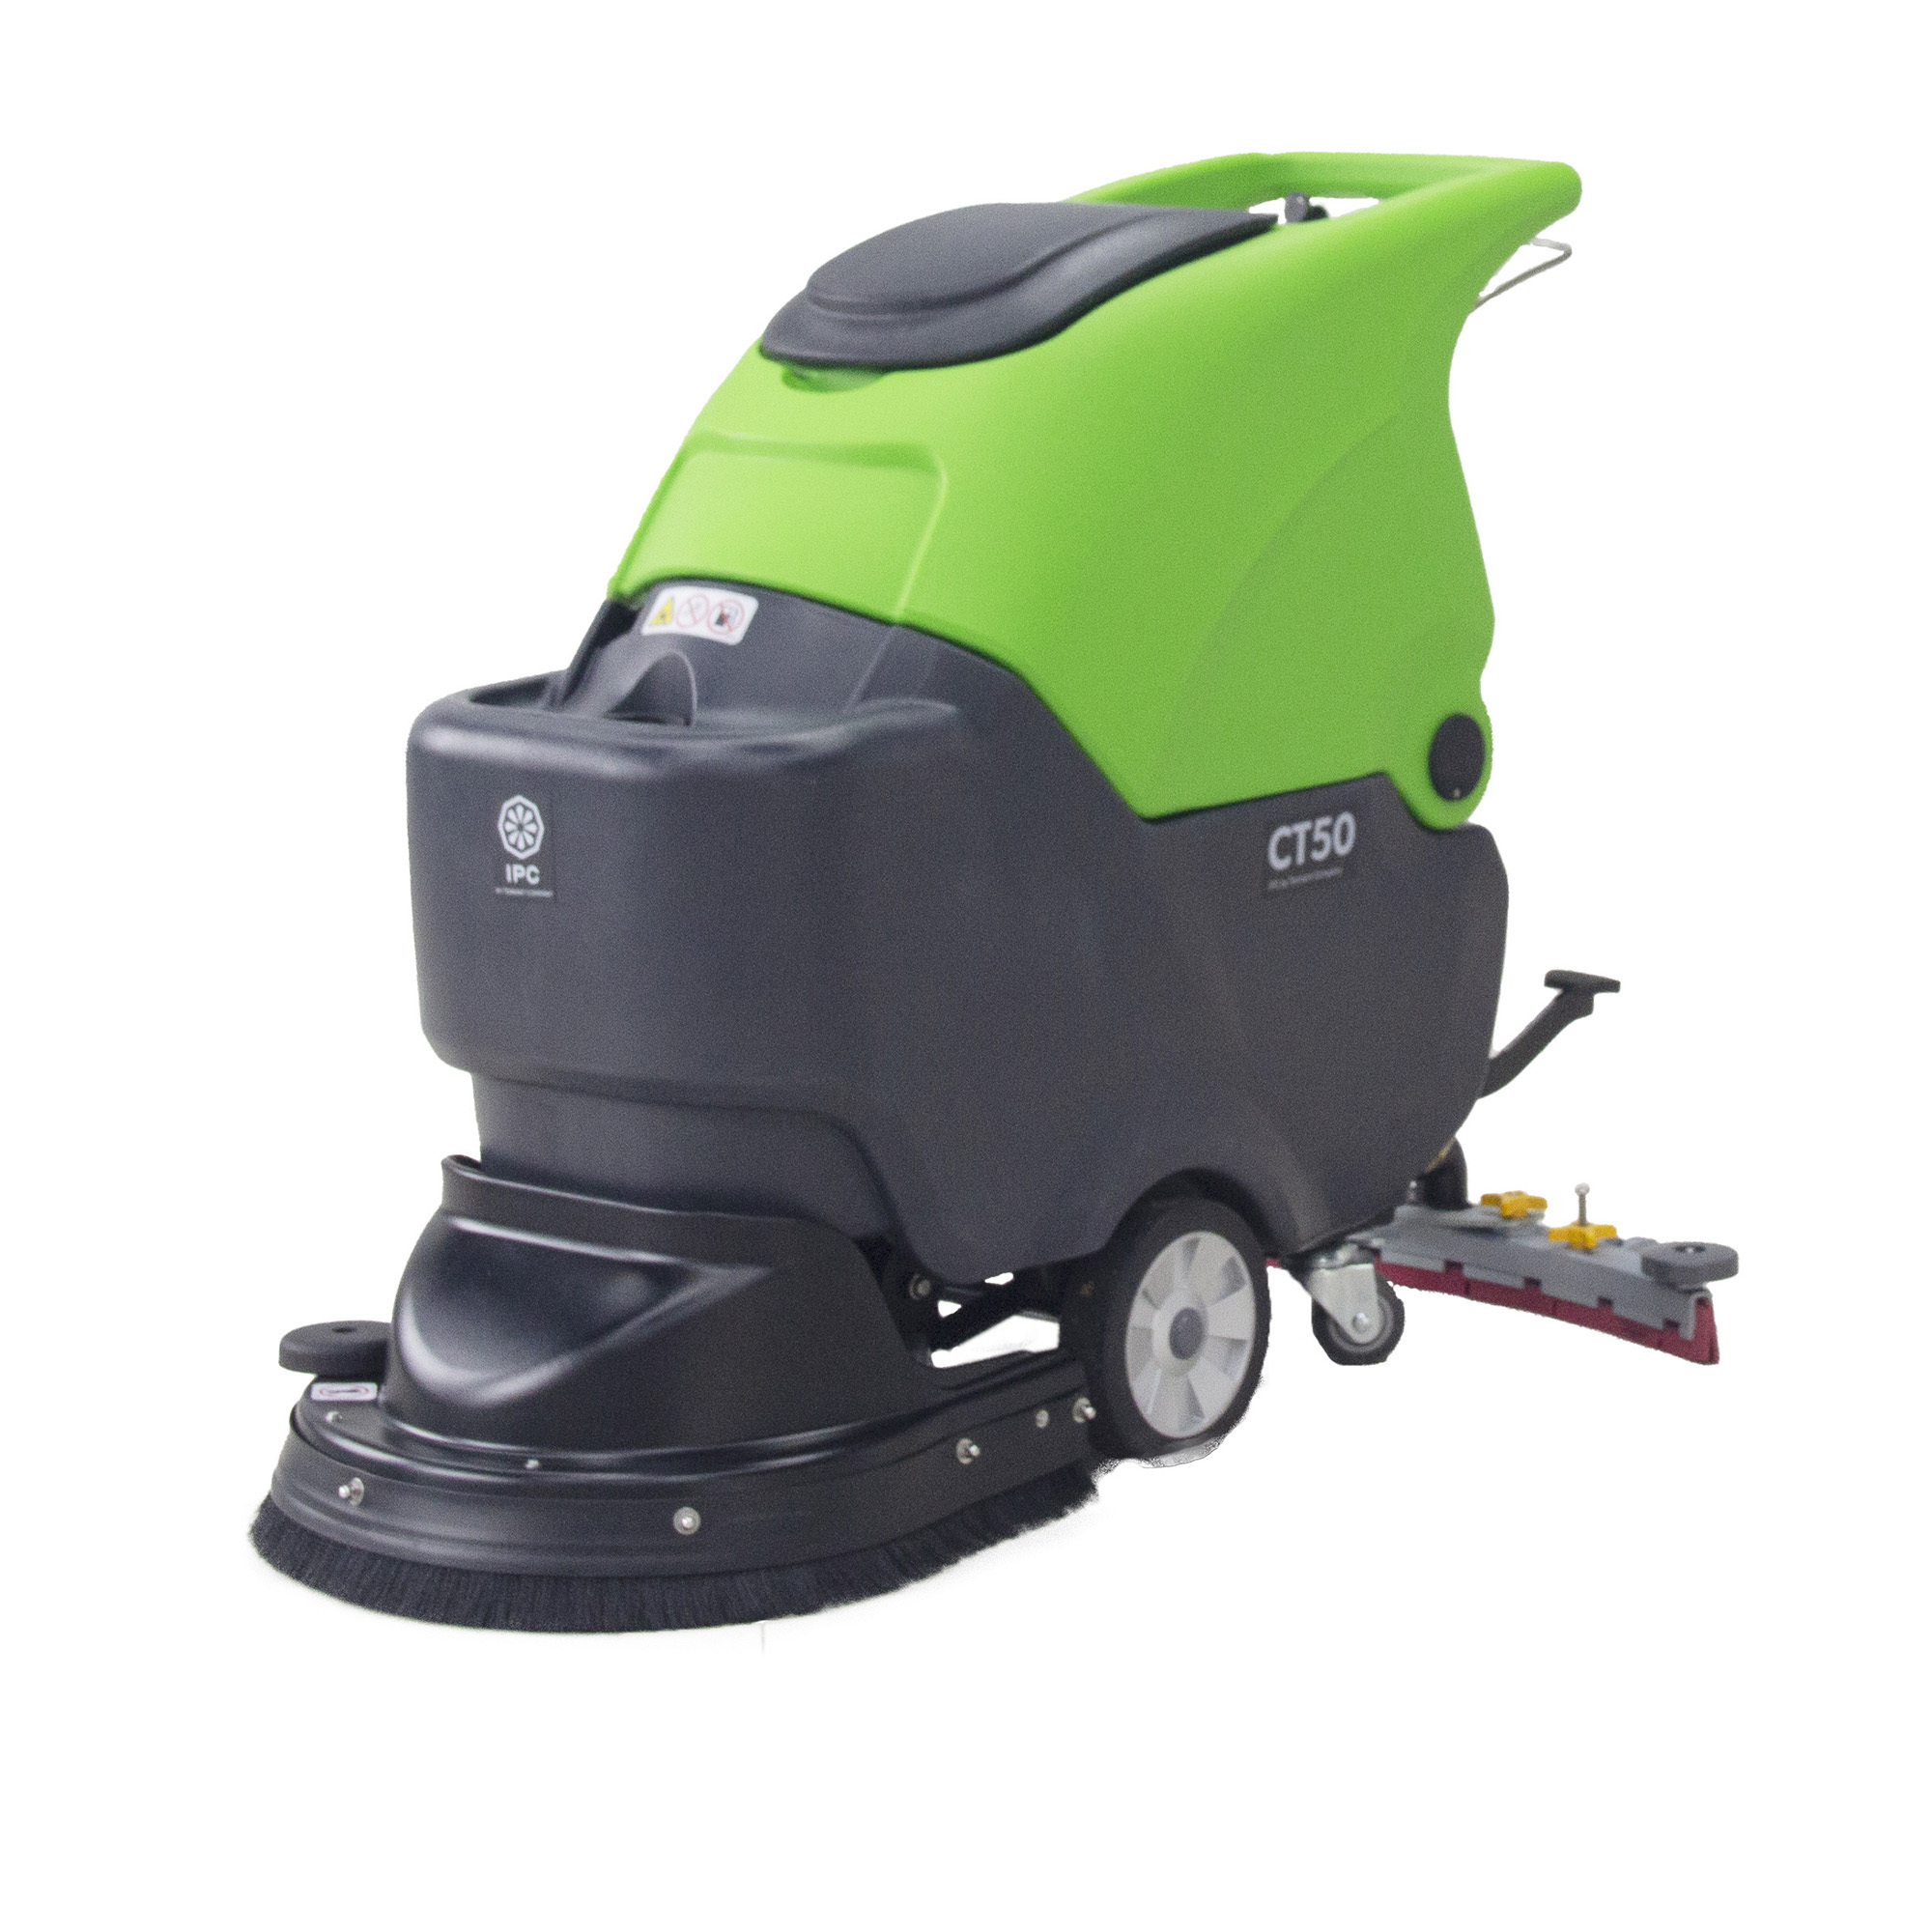 IPC Eagle, 20Inch High Capacity Floor Scrubber Battery Powered, Capacity 13 Gal, Model CT50